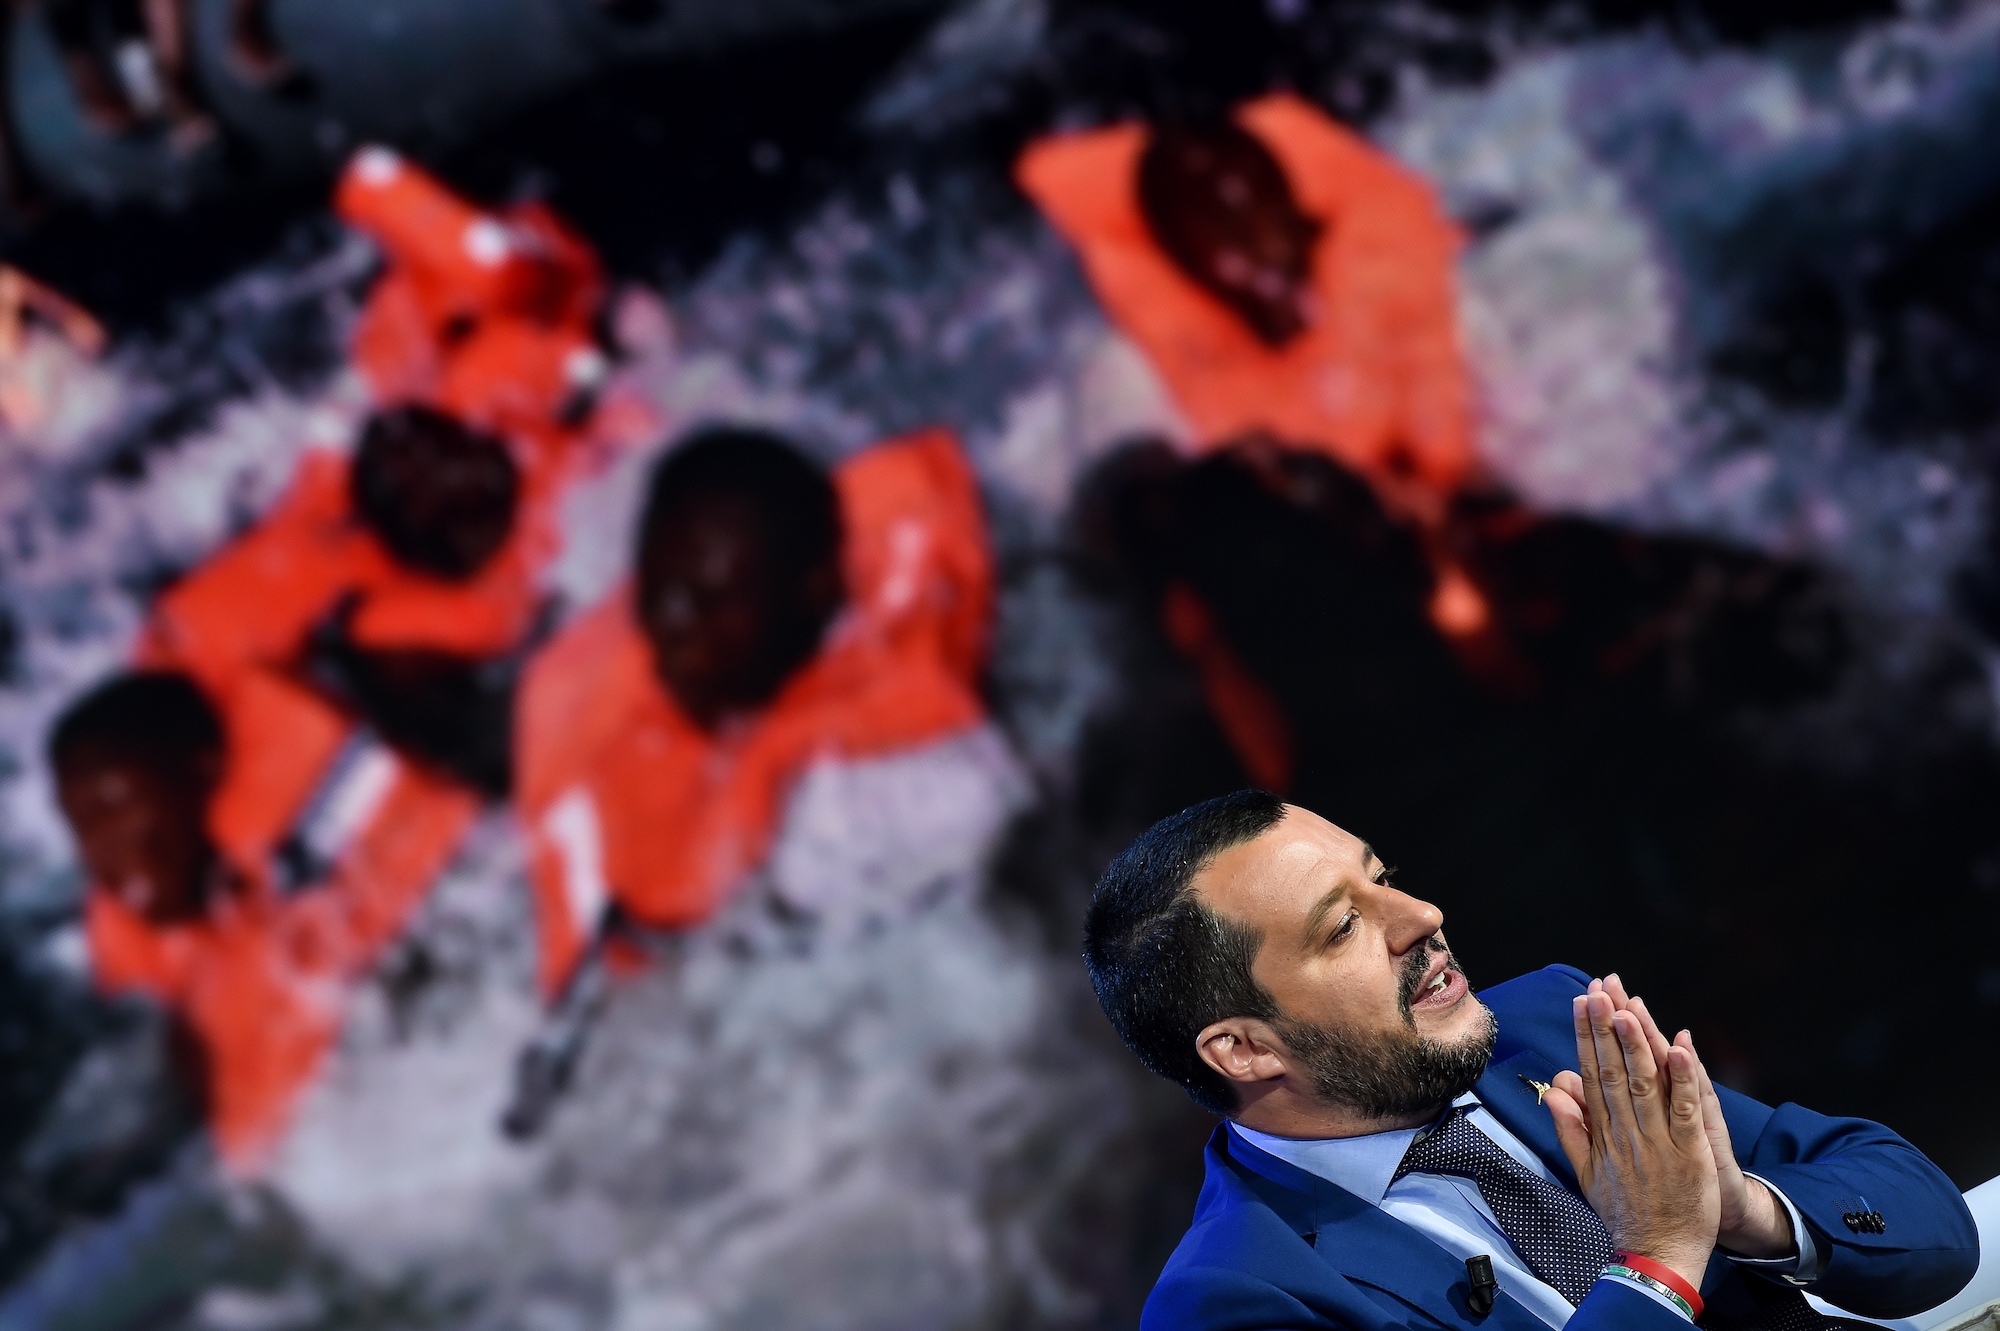 TOPSHOT - Italy's Interior Minister and Deputy Prime Minister Matteo Salvini speaks during the Italian talk show "Porta a Porta", broadcast on Italian channel Rai 1, in Rome, on June 20, 2018, as picture of migrants is seen in the background. (Photo by Andreas SOLARO / AFP)        (Photo credit should read ANDREAS SOLARO/AFP/Getty Images)